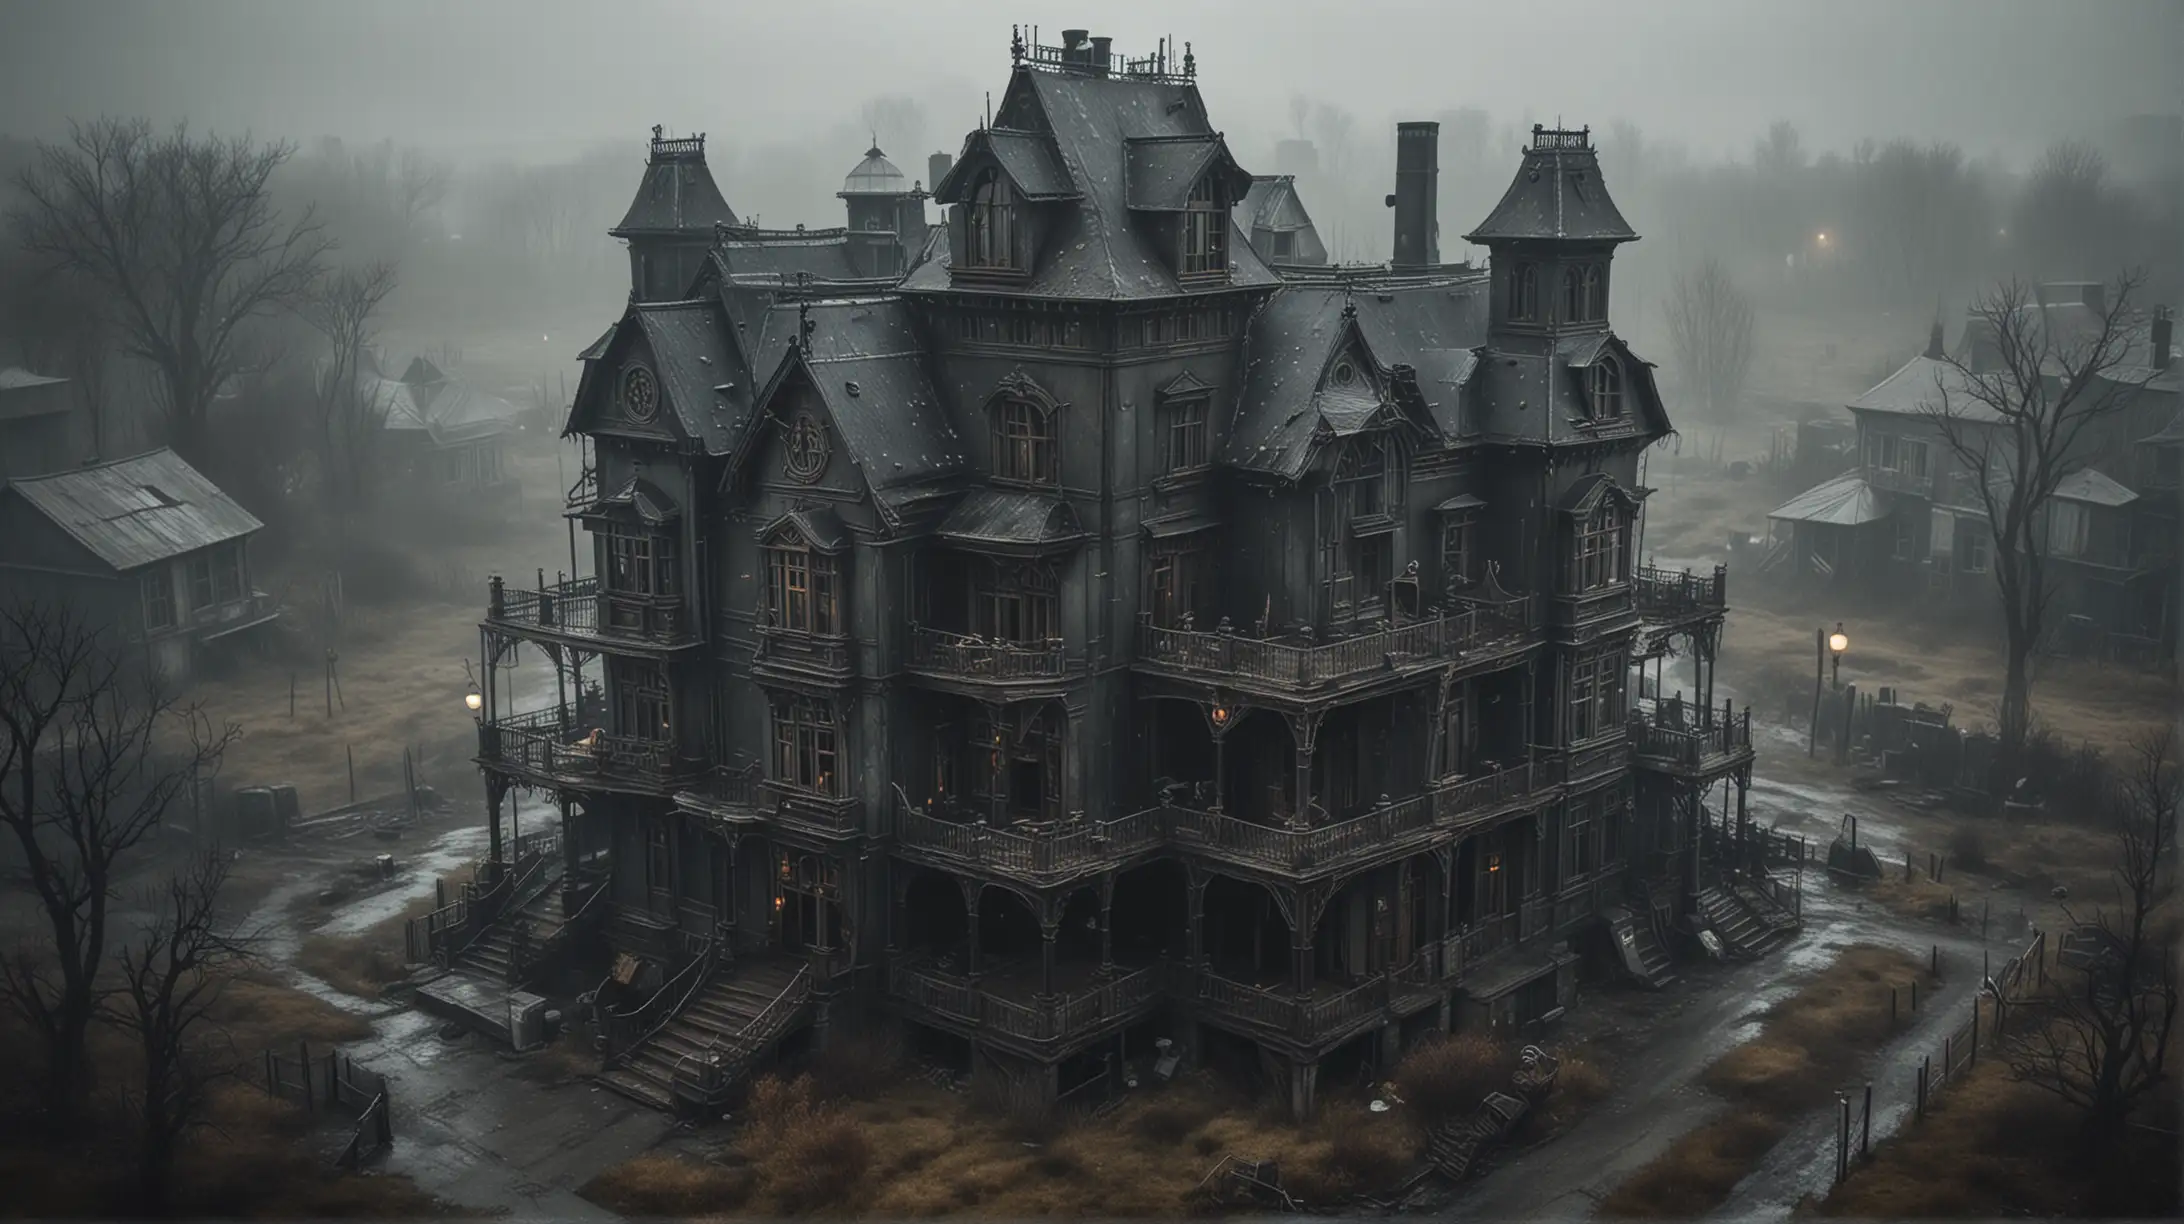 an old steampunk manor house in the wasteland, completely dark, rain and heavy fog, bird's eye view